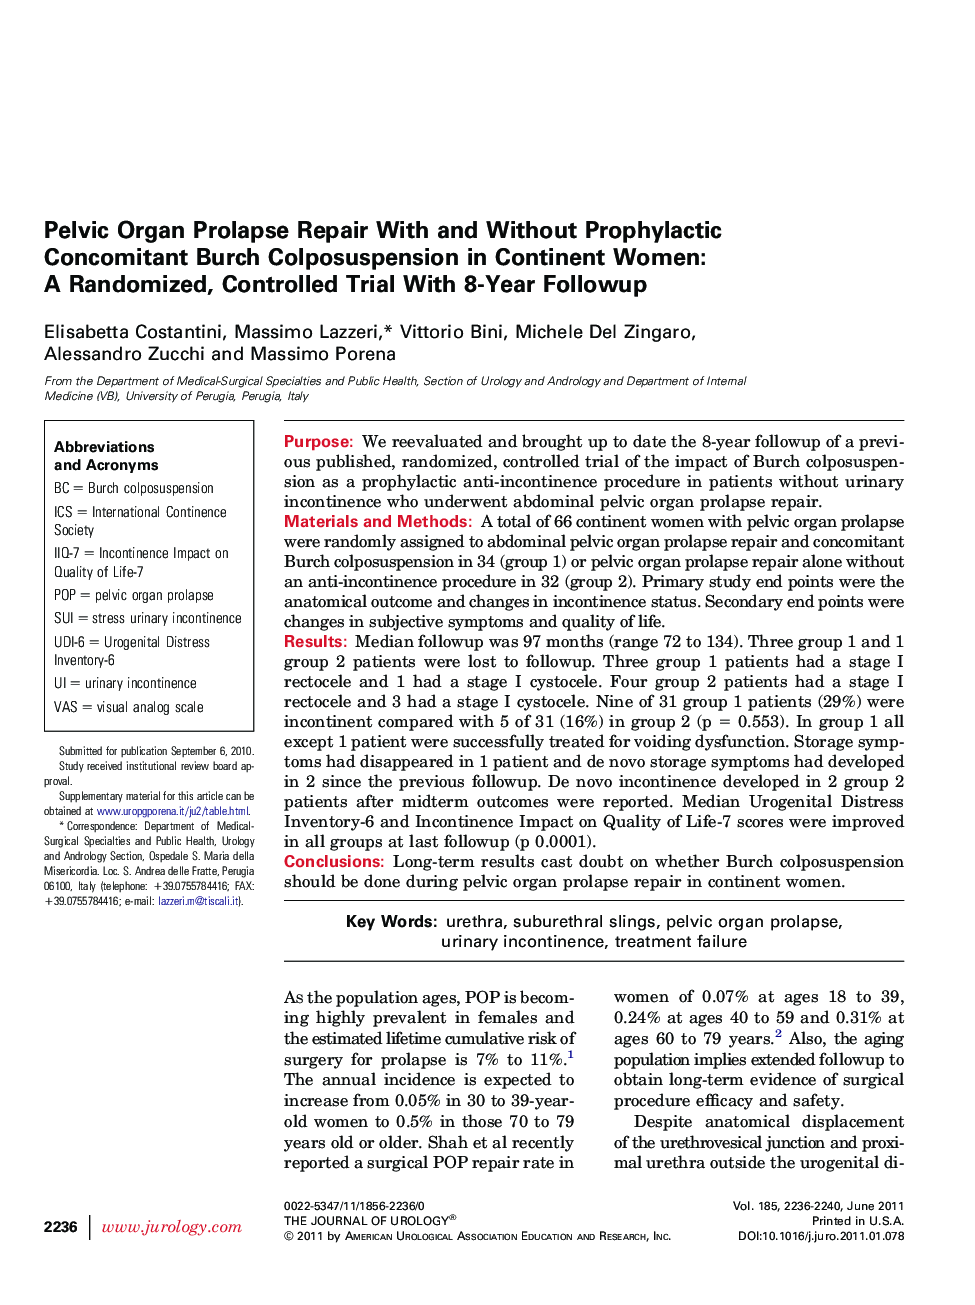 Pelvic Organ Prolapse Repair With and Without Prophylactic Concomitant Burch Colposuspension in Continent Women: A Randomized, Controlled Trial With 8-Year Followup 